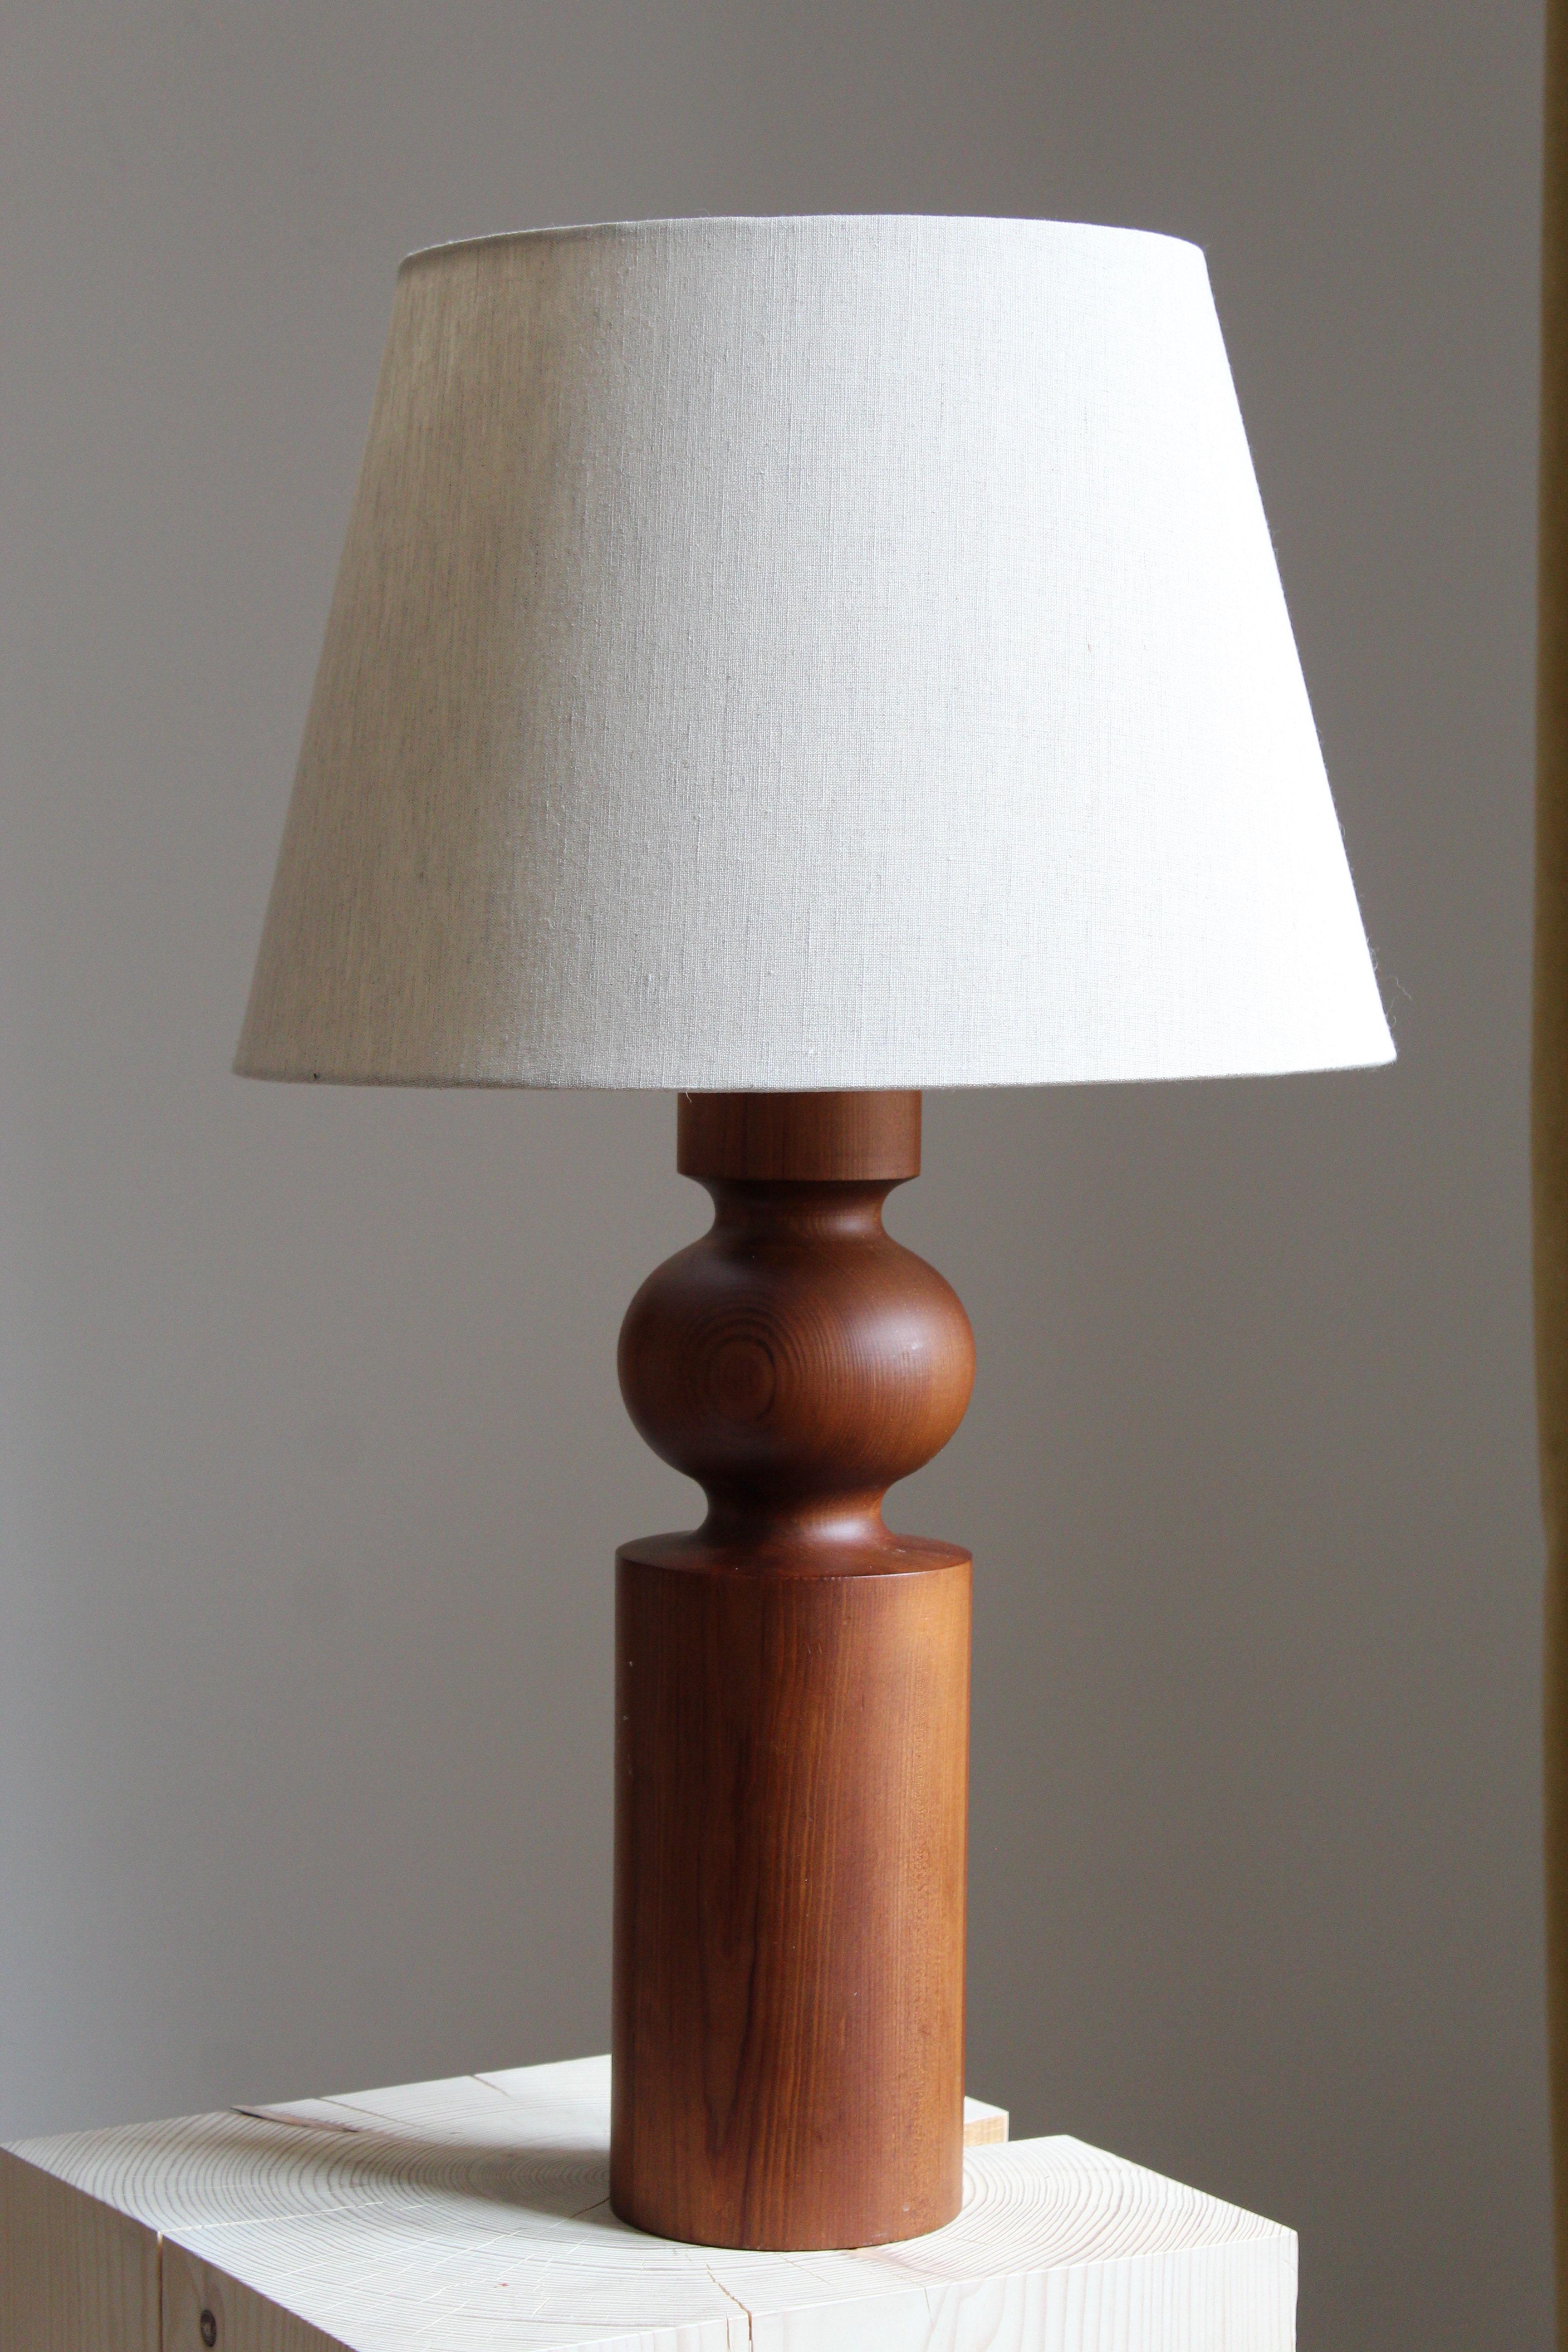 A solid pine table lamp. Designed by Uno Kristiansson, for Luxus, Sweden, 1960s.

Sold without lampshade, measurements stated are excluding lampshade.

Other designers of the period include Axel Einar Hjorth, Roland Wilhelmsson, Charlotte